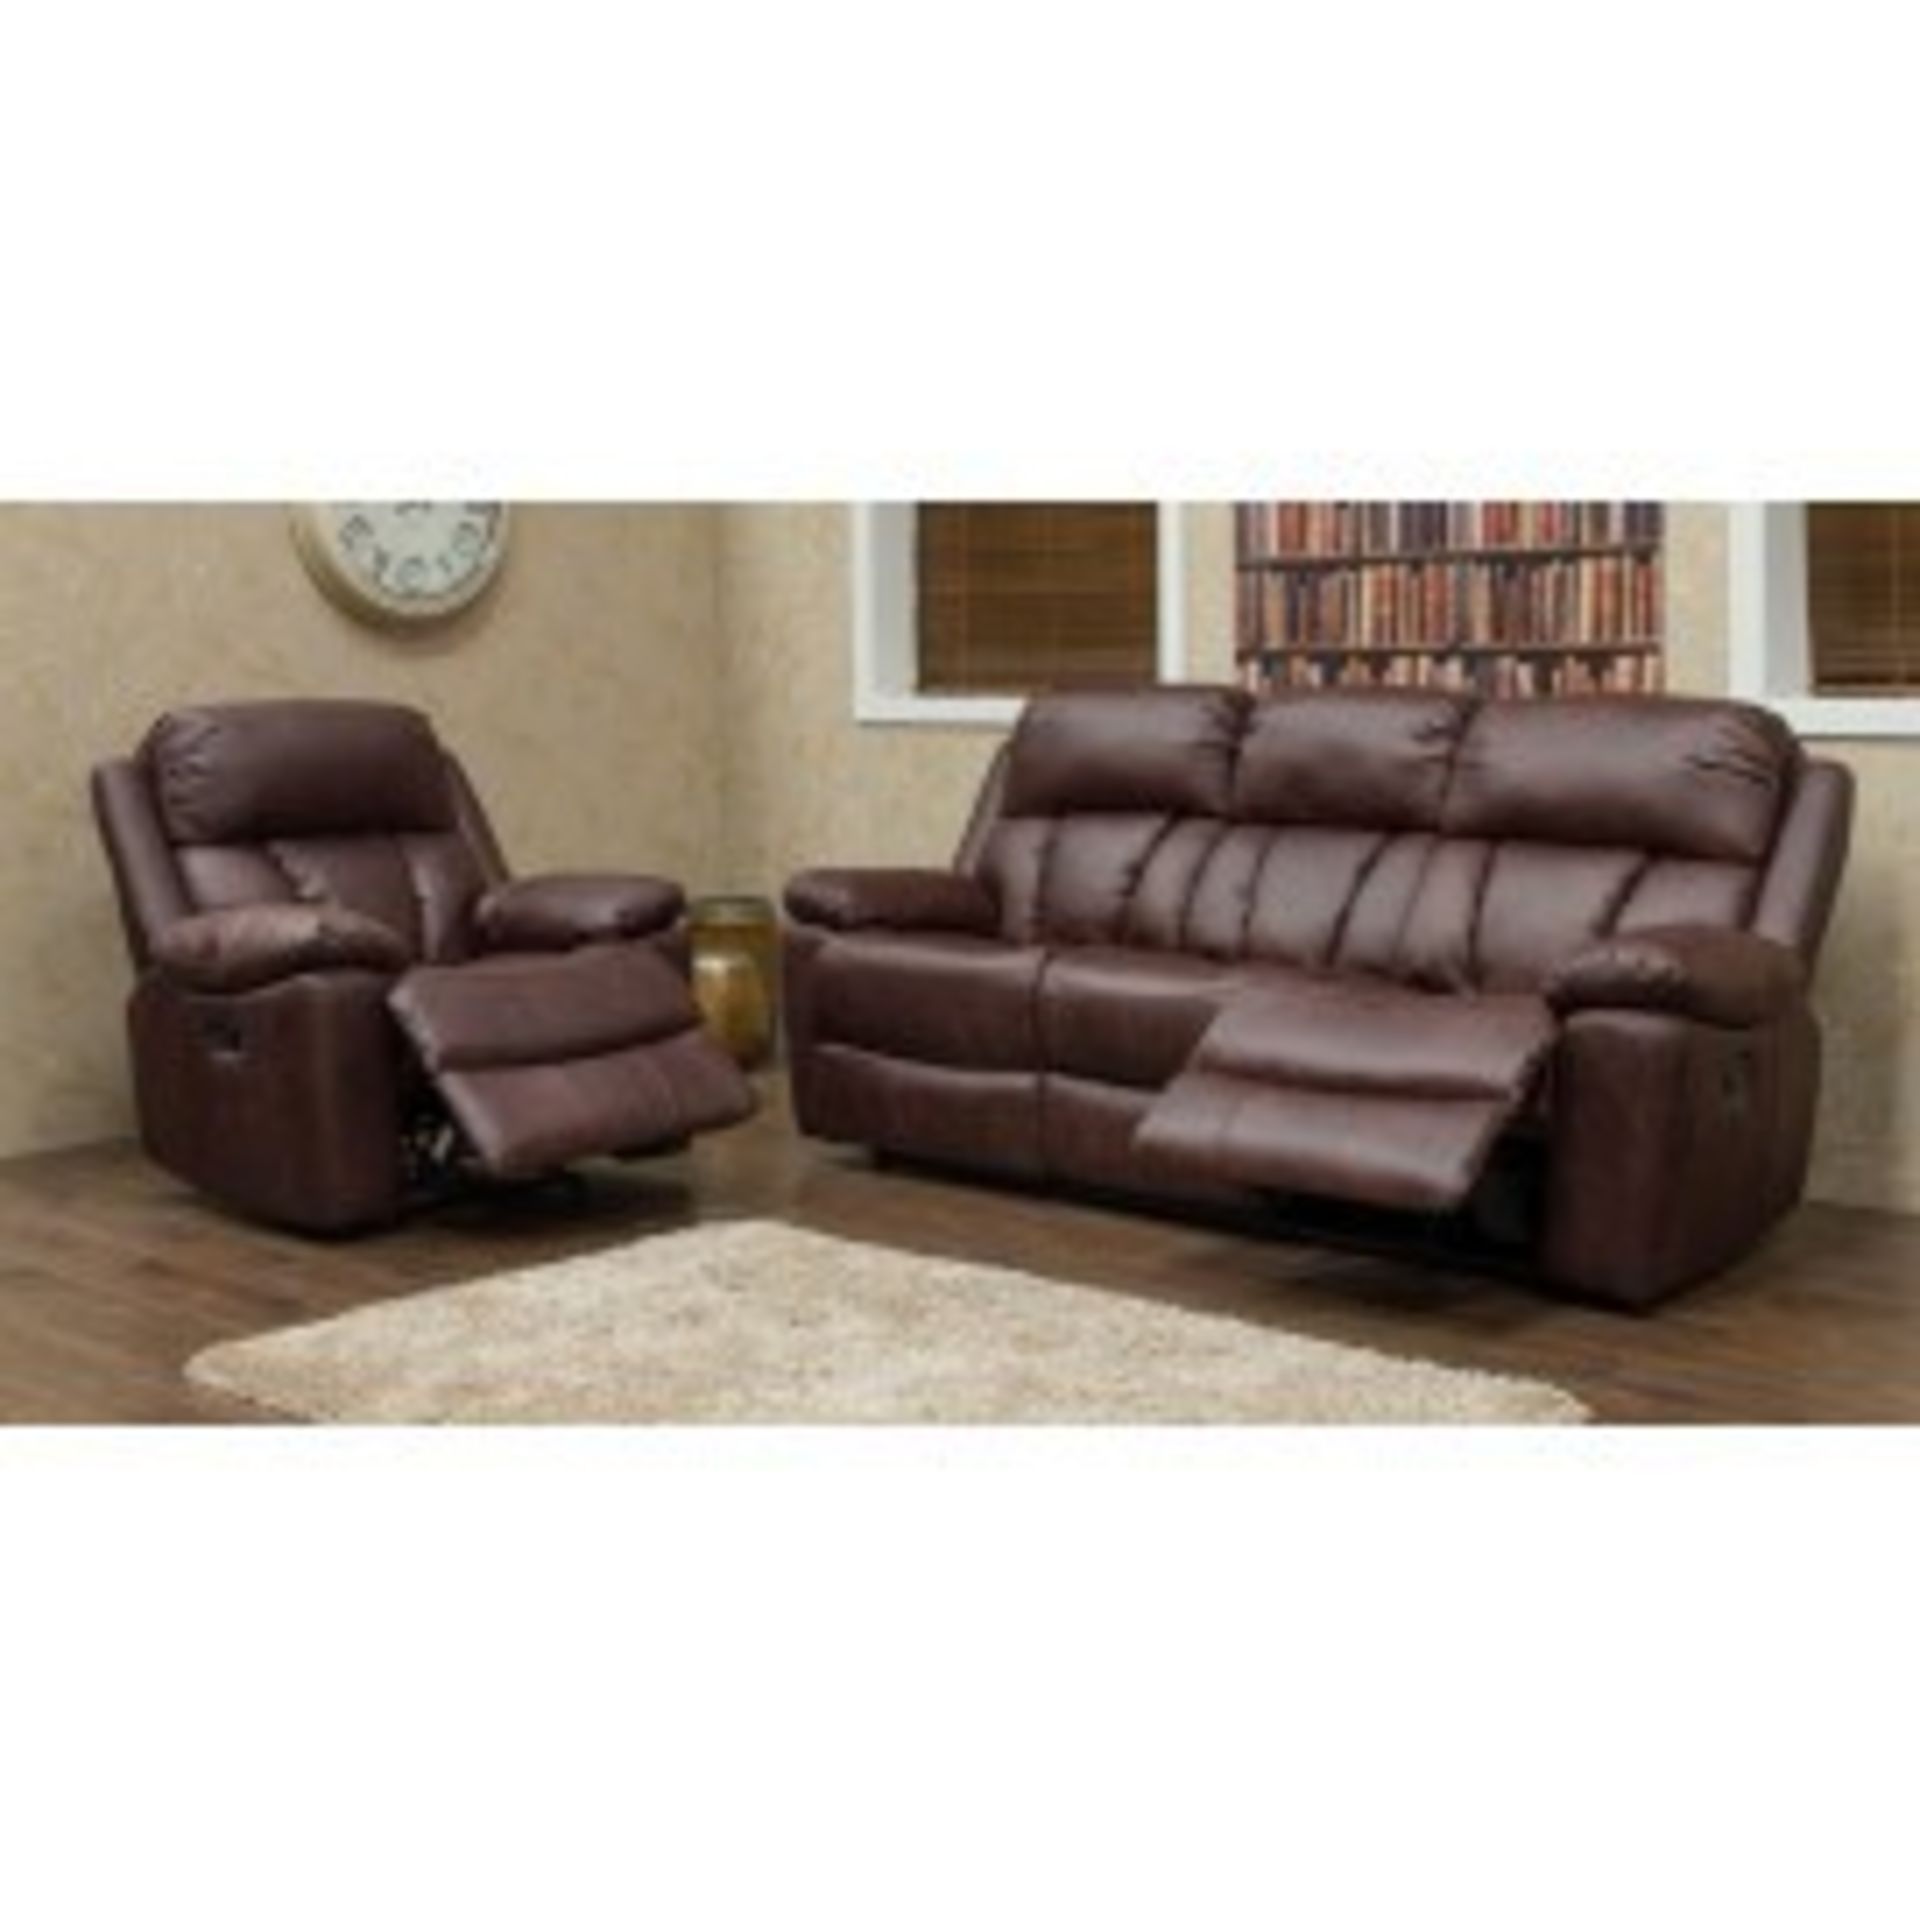 Brand New Boxed Benson 3 Seater Brown Leatheraire Reclining Sofa Plus 2 Matching Arm Chairs - Bild 2 aus 2